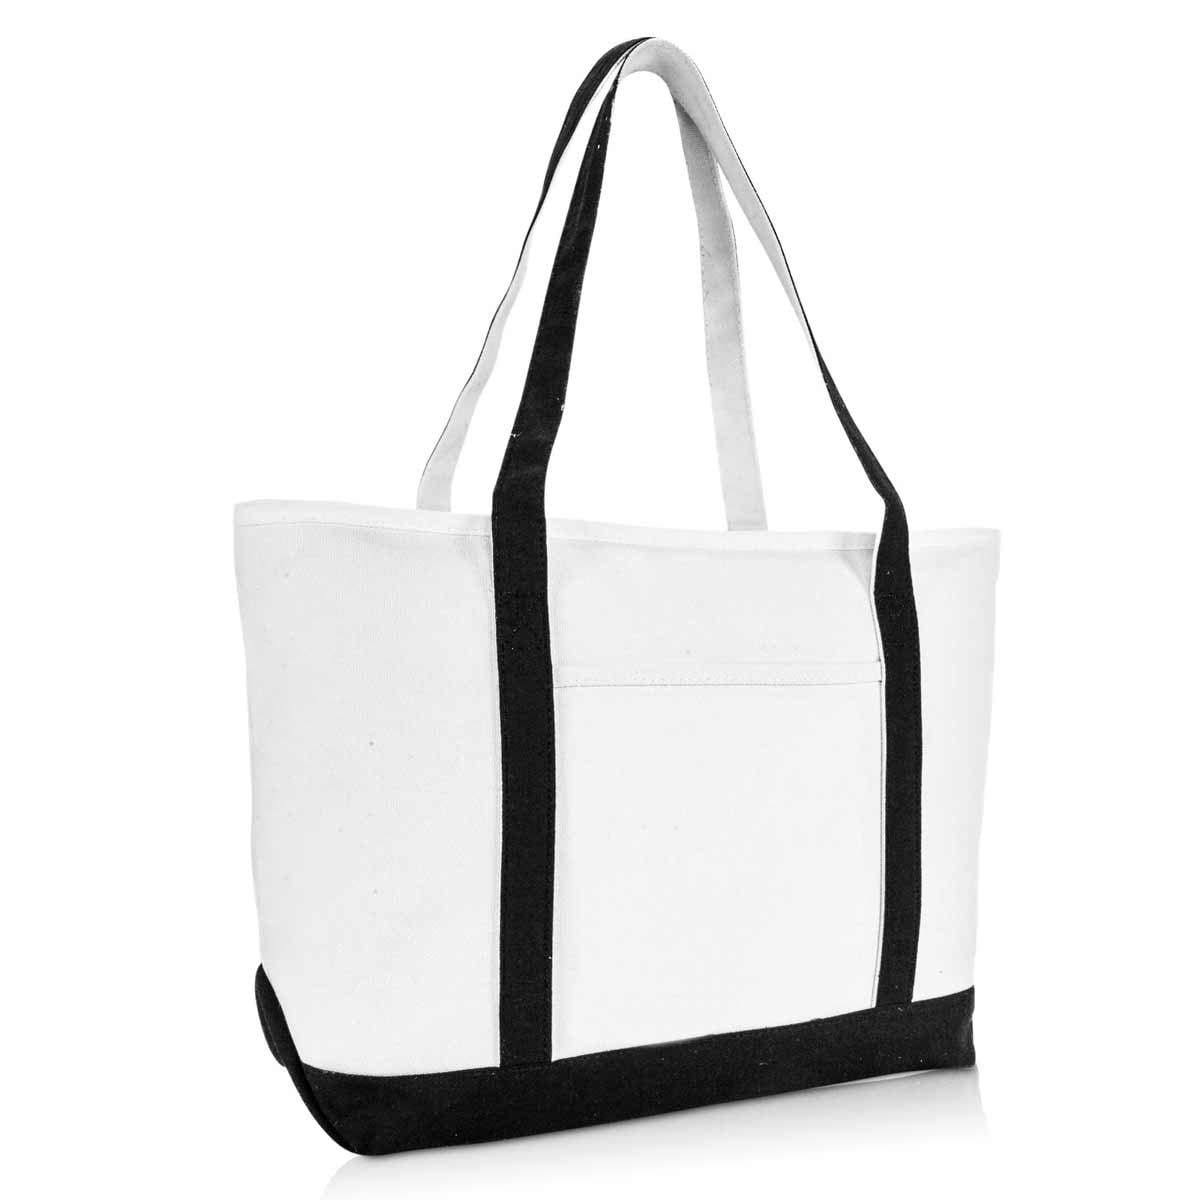 12 Pack) Set of 12- Extra Heavy Duty Canvas Tote Bag with Gusset